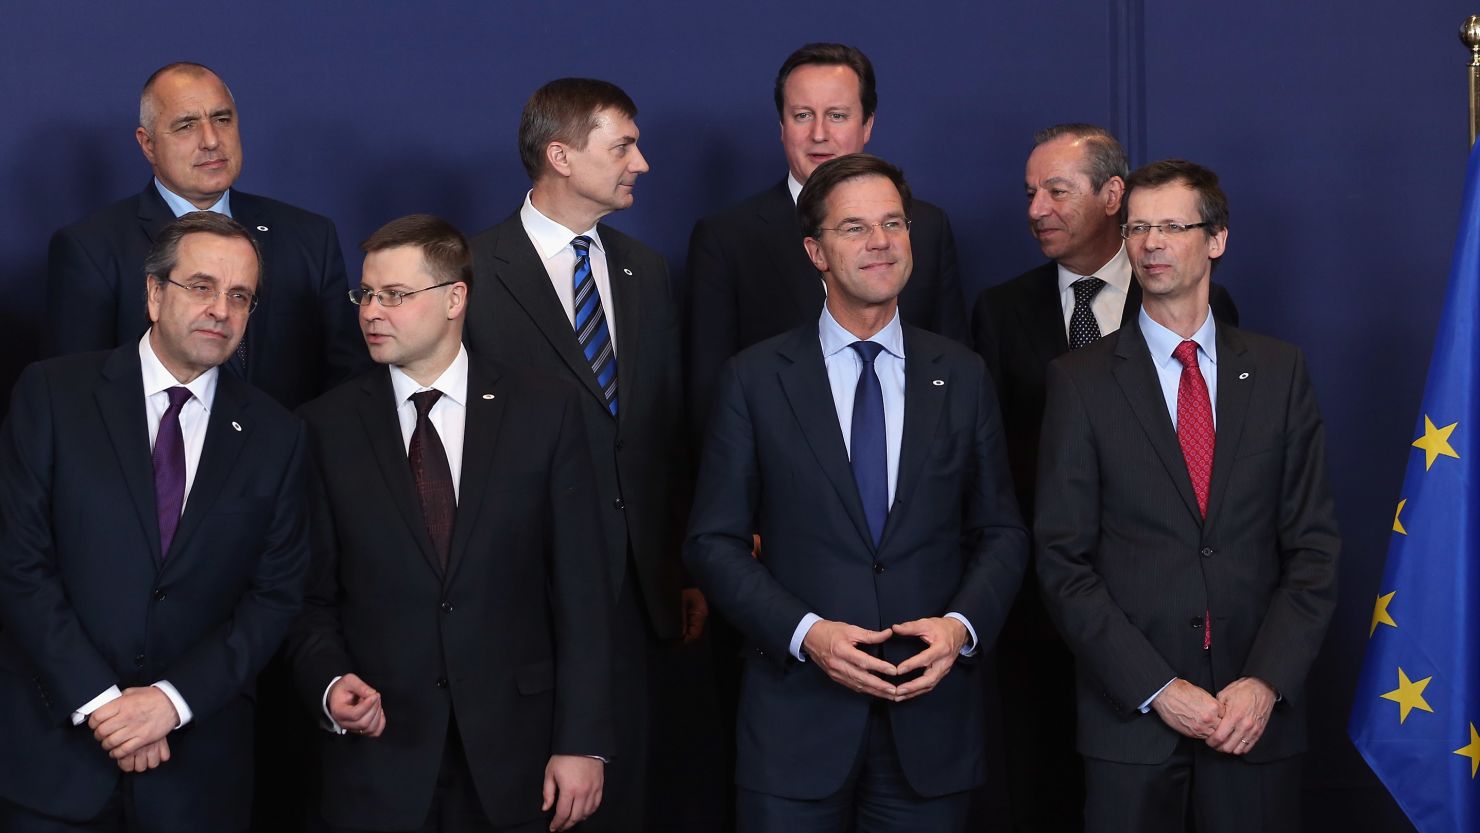 Prime ministers from various European countries pose together at the European Council Meeting on Thursday in Brussels.